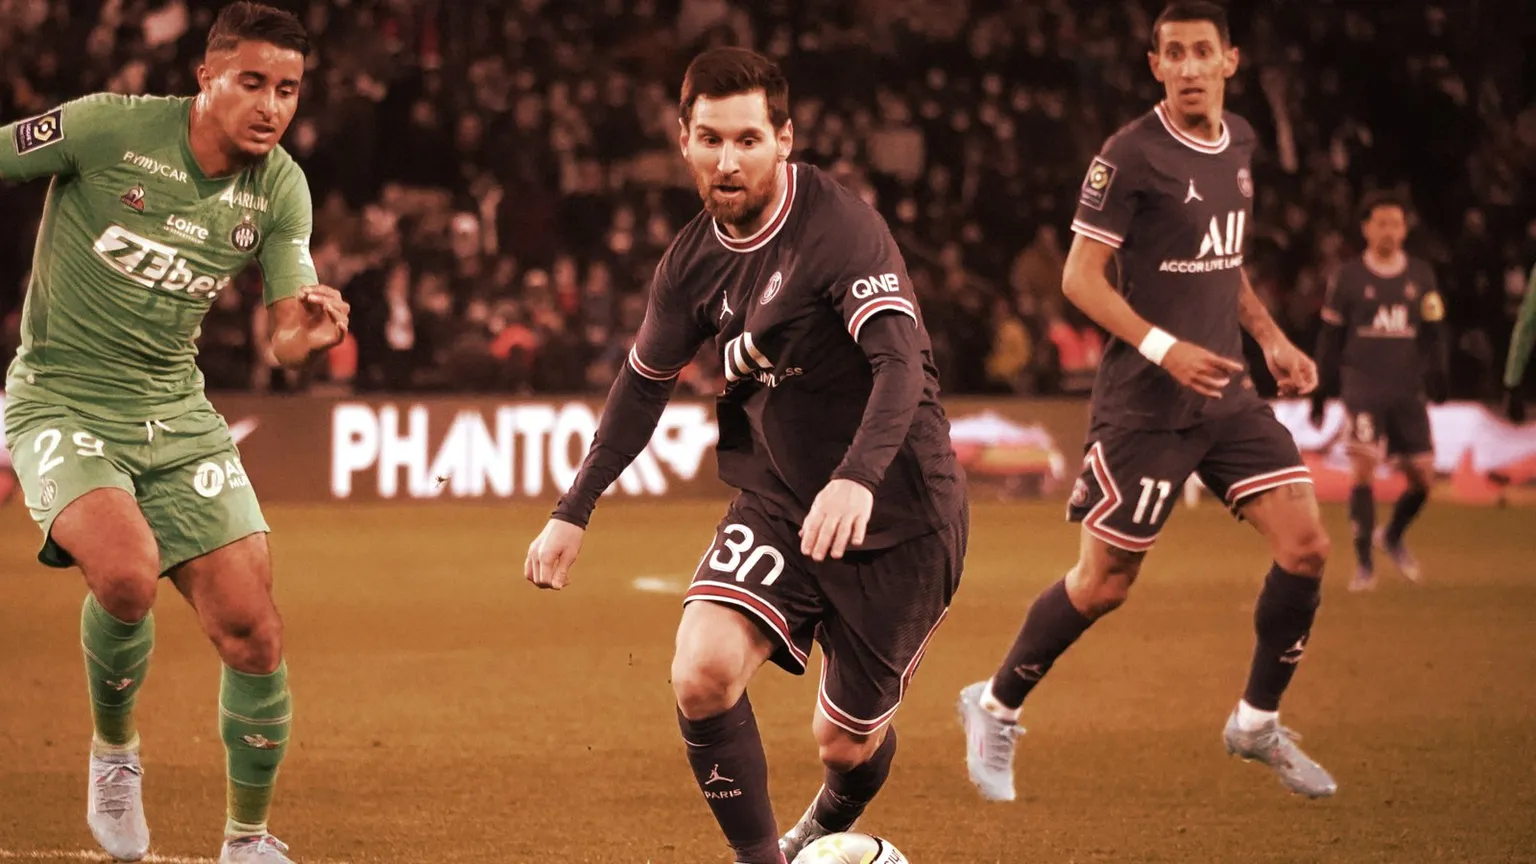 Lionel Messi is a professional soccer player who plays for Paris Saint-Germain. Image: Shutterstock.